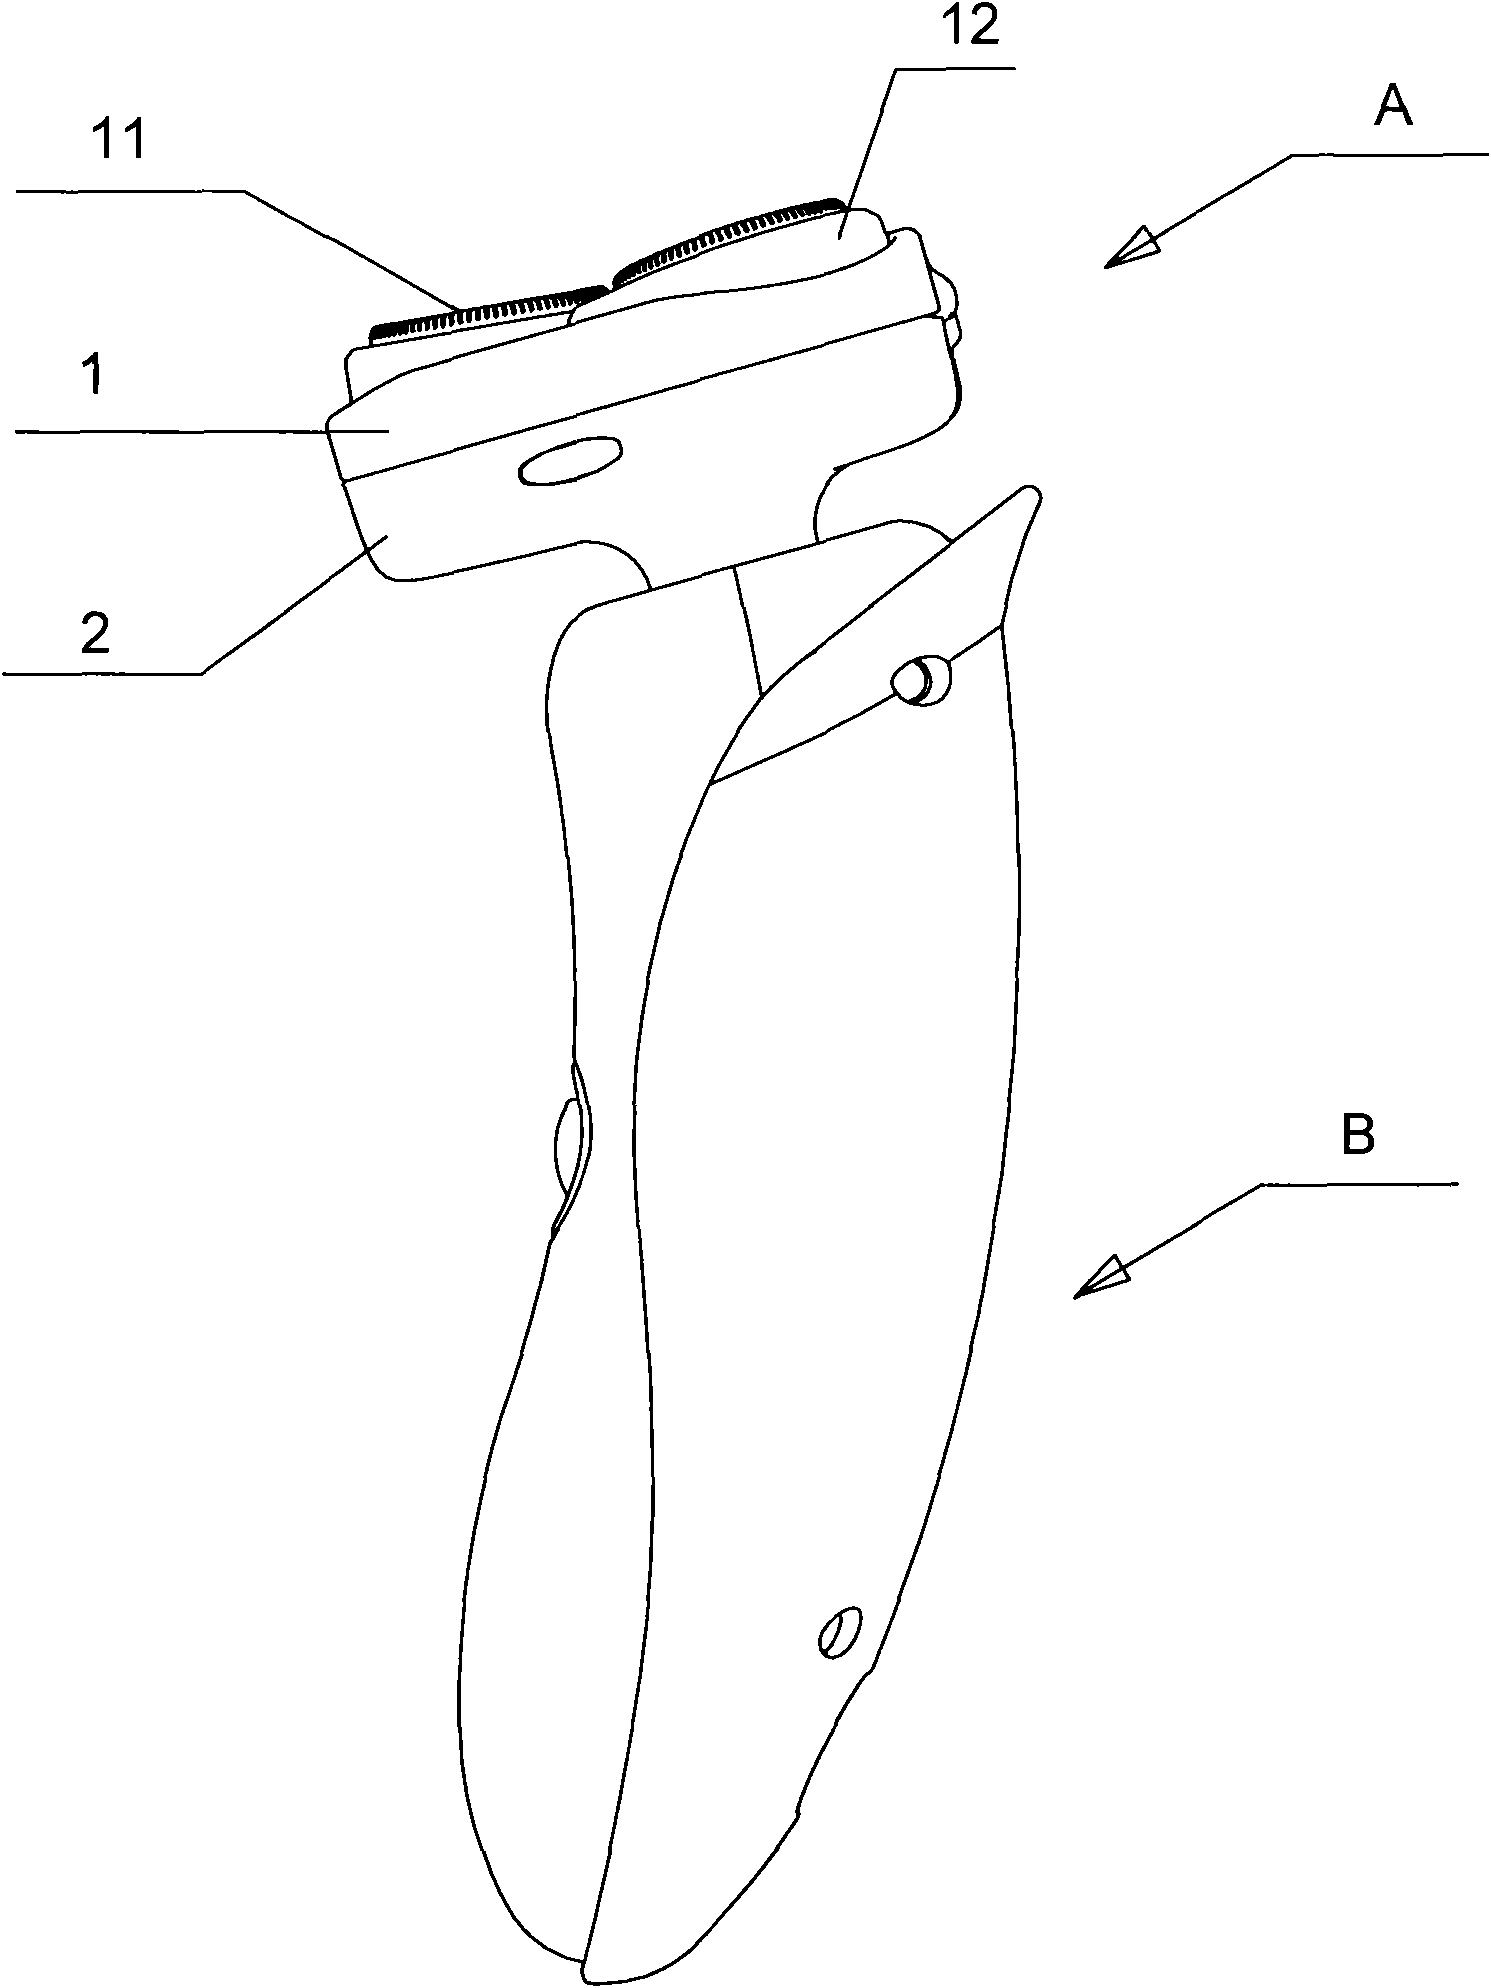 Rotary type shaver with head part capable of omnidirectionally floating